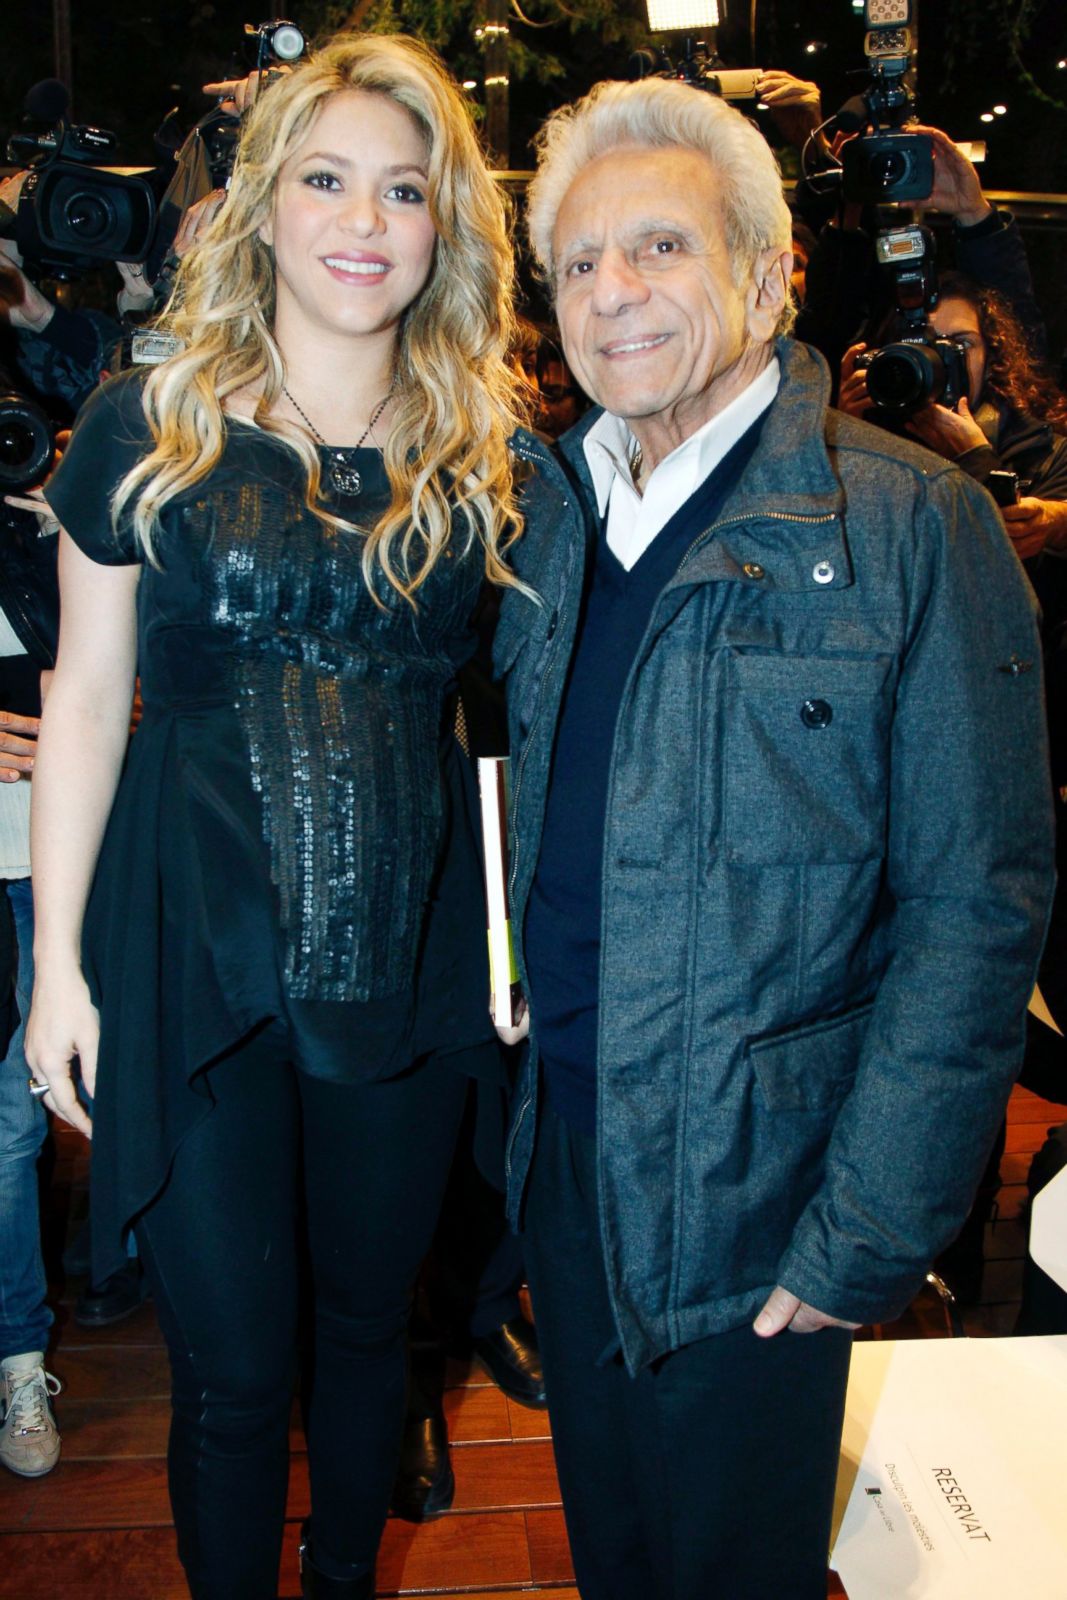 Shakira and her dad William Mebarak Chadid Picture Meet the fathers